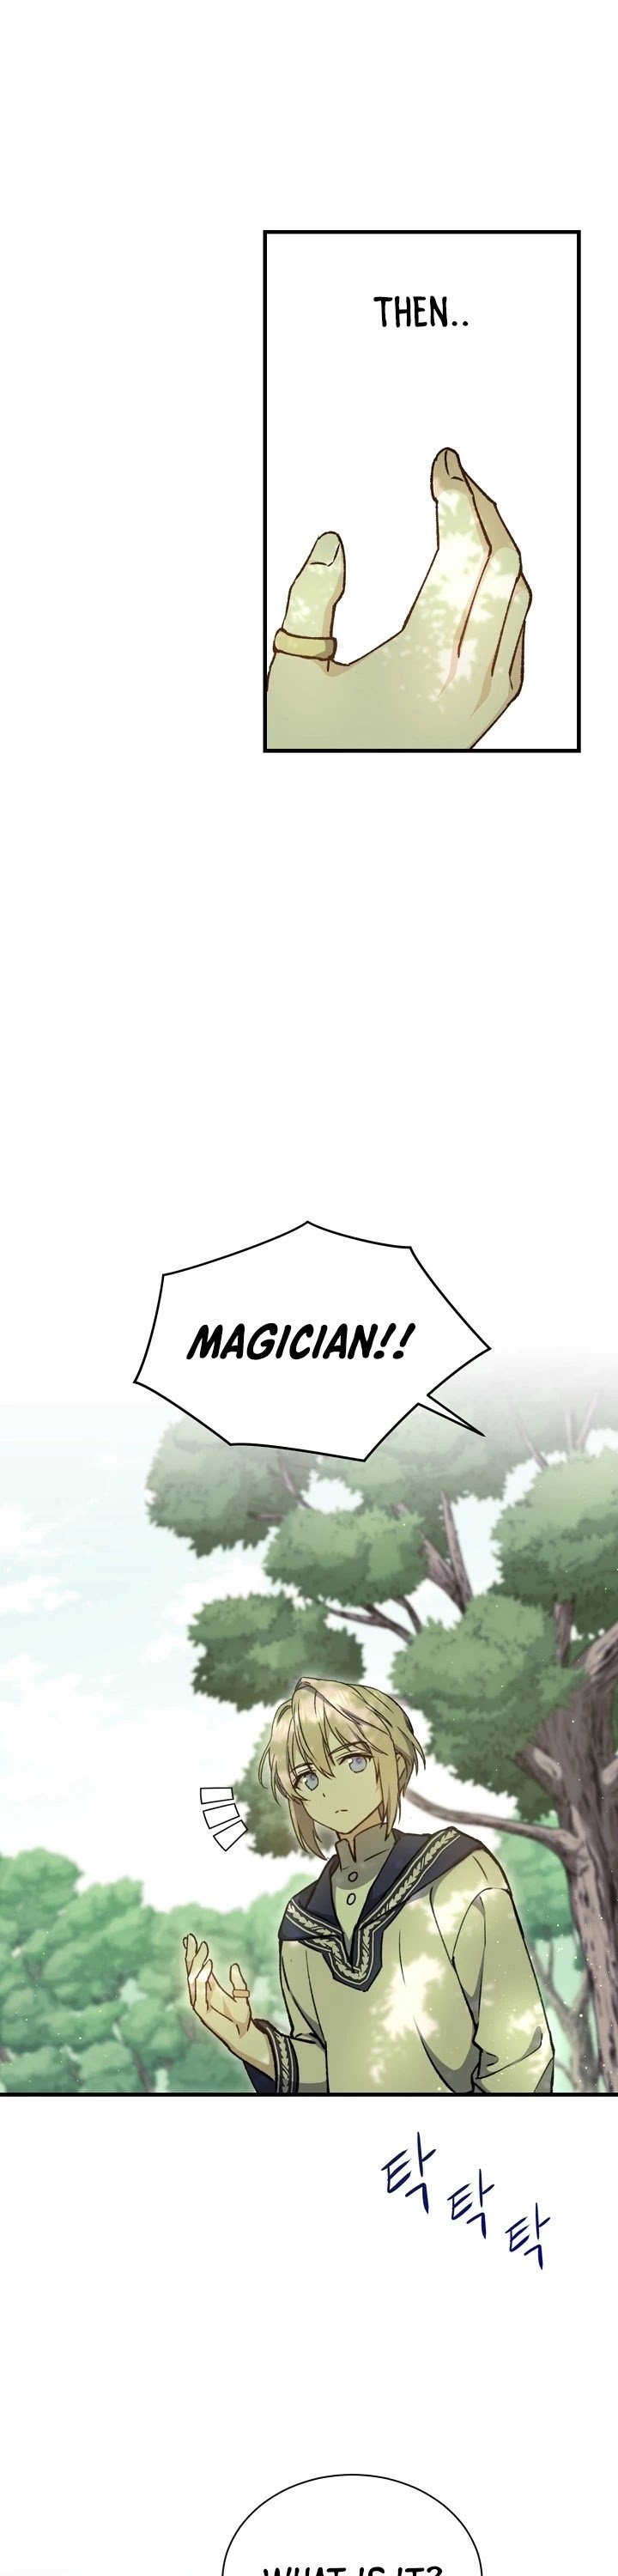 Return of the 8th class Magician chapter 7